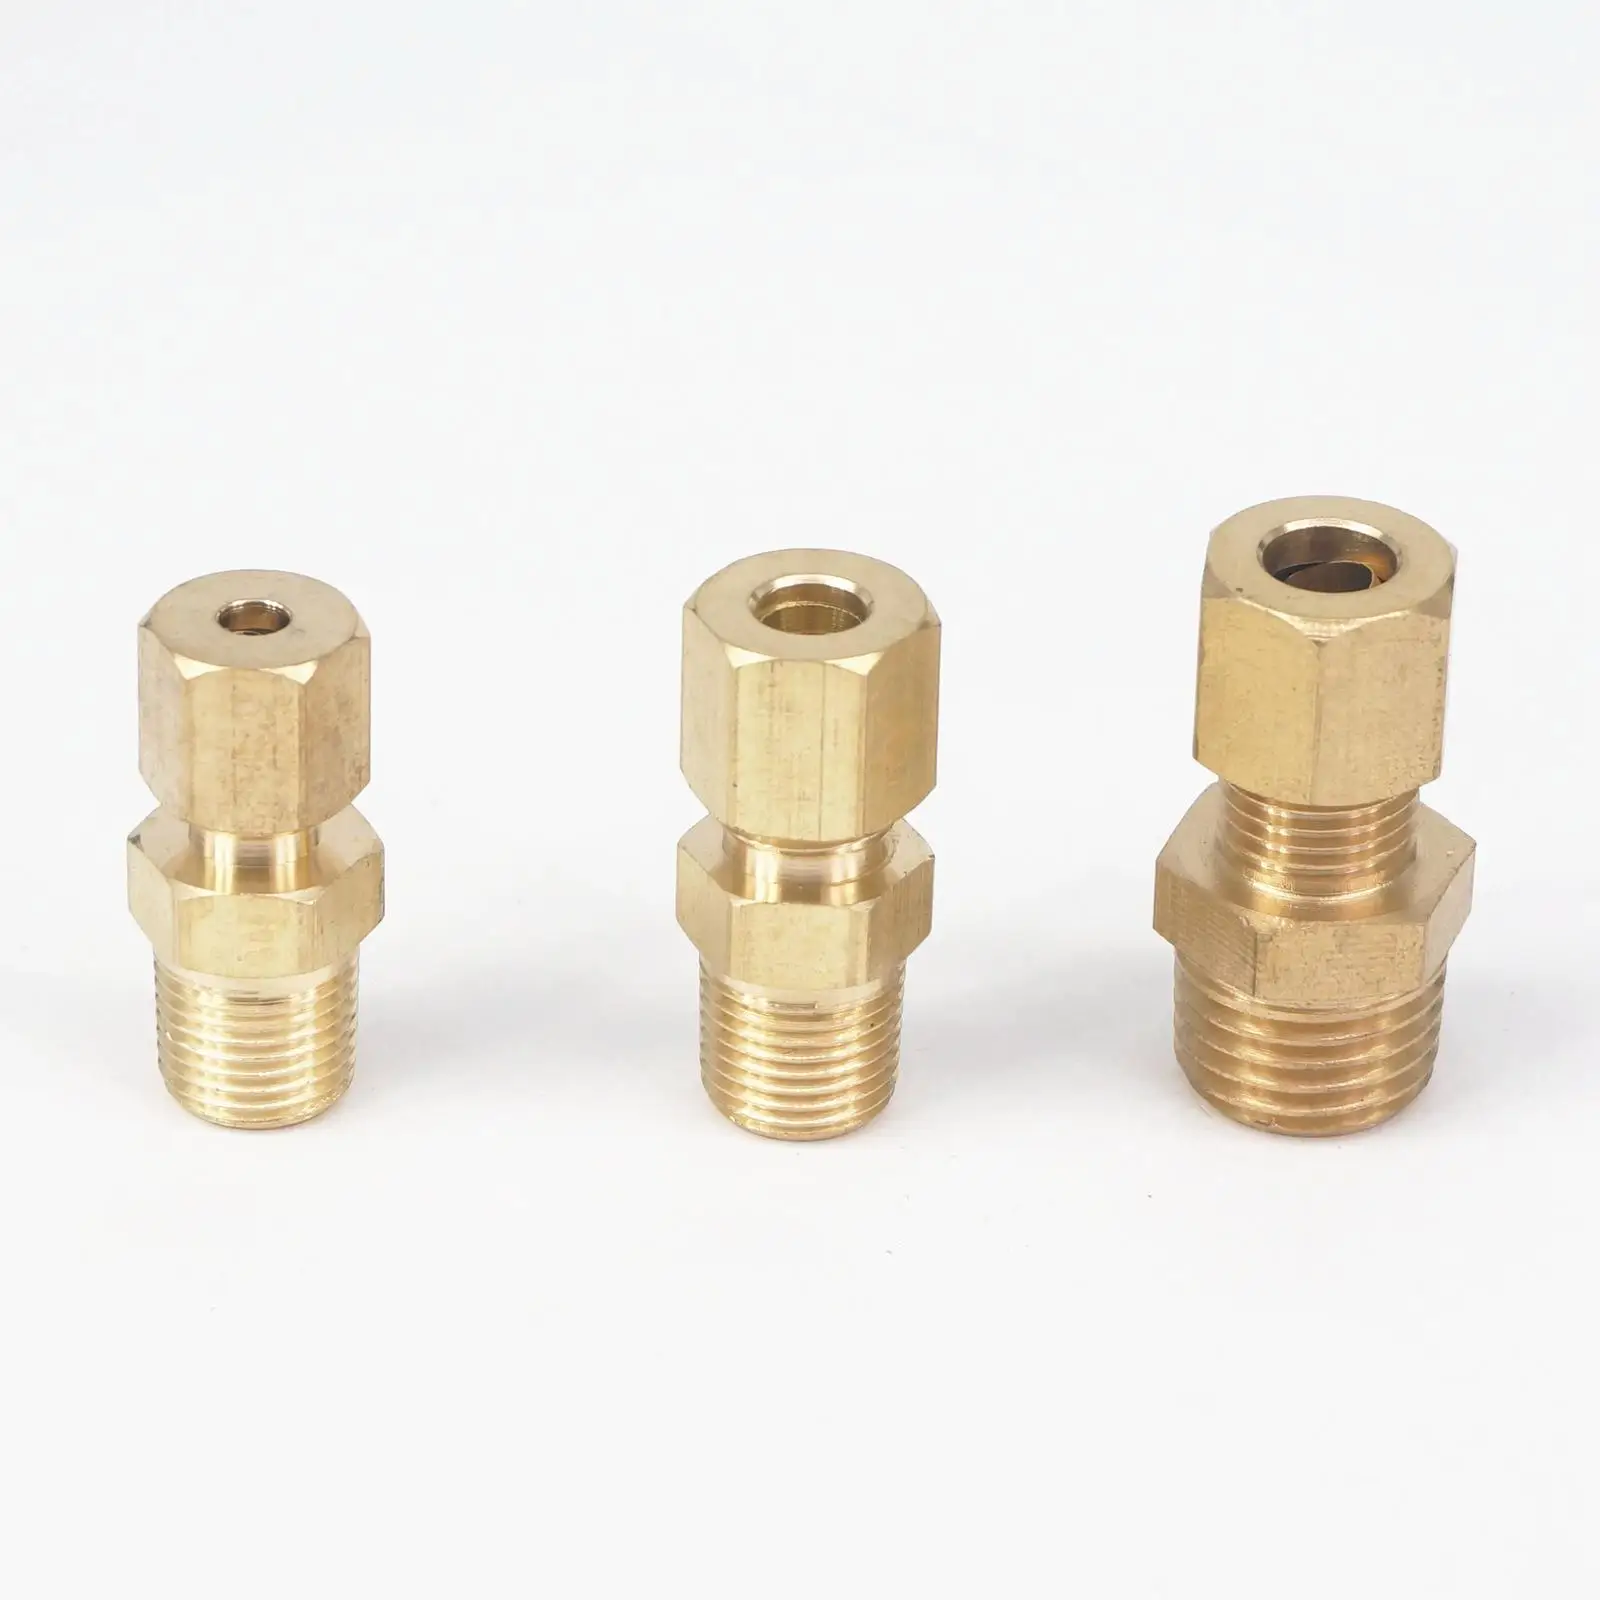 

1/8" 1/4" 3/8" 1/2" NPT Male x Fit Tube O.D 1/8" 3/16" 1/4" 3/8" Compression Union Brass Pipe Fitting Connectors 229 PSI